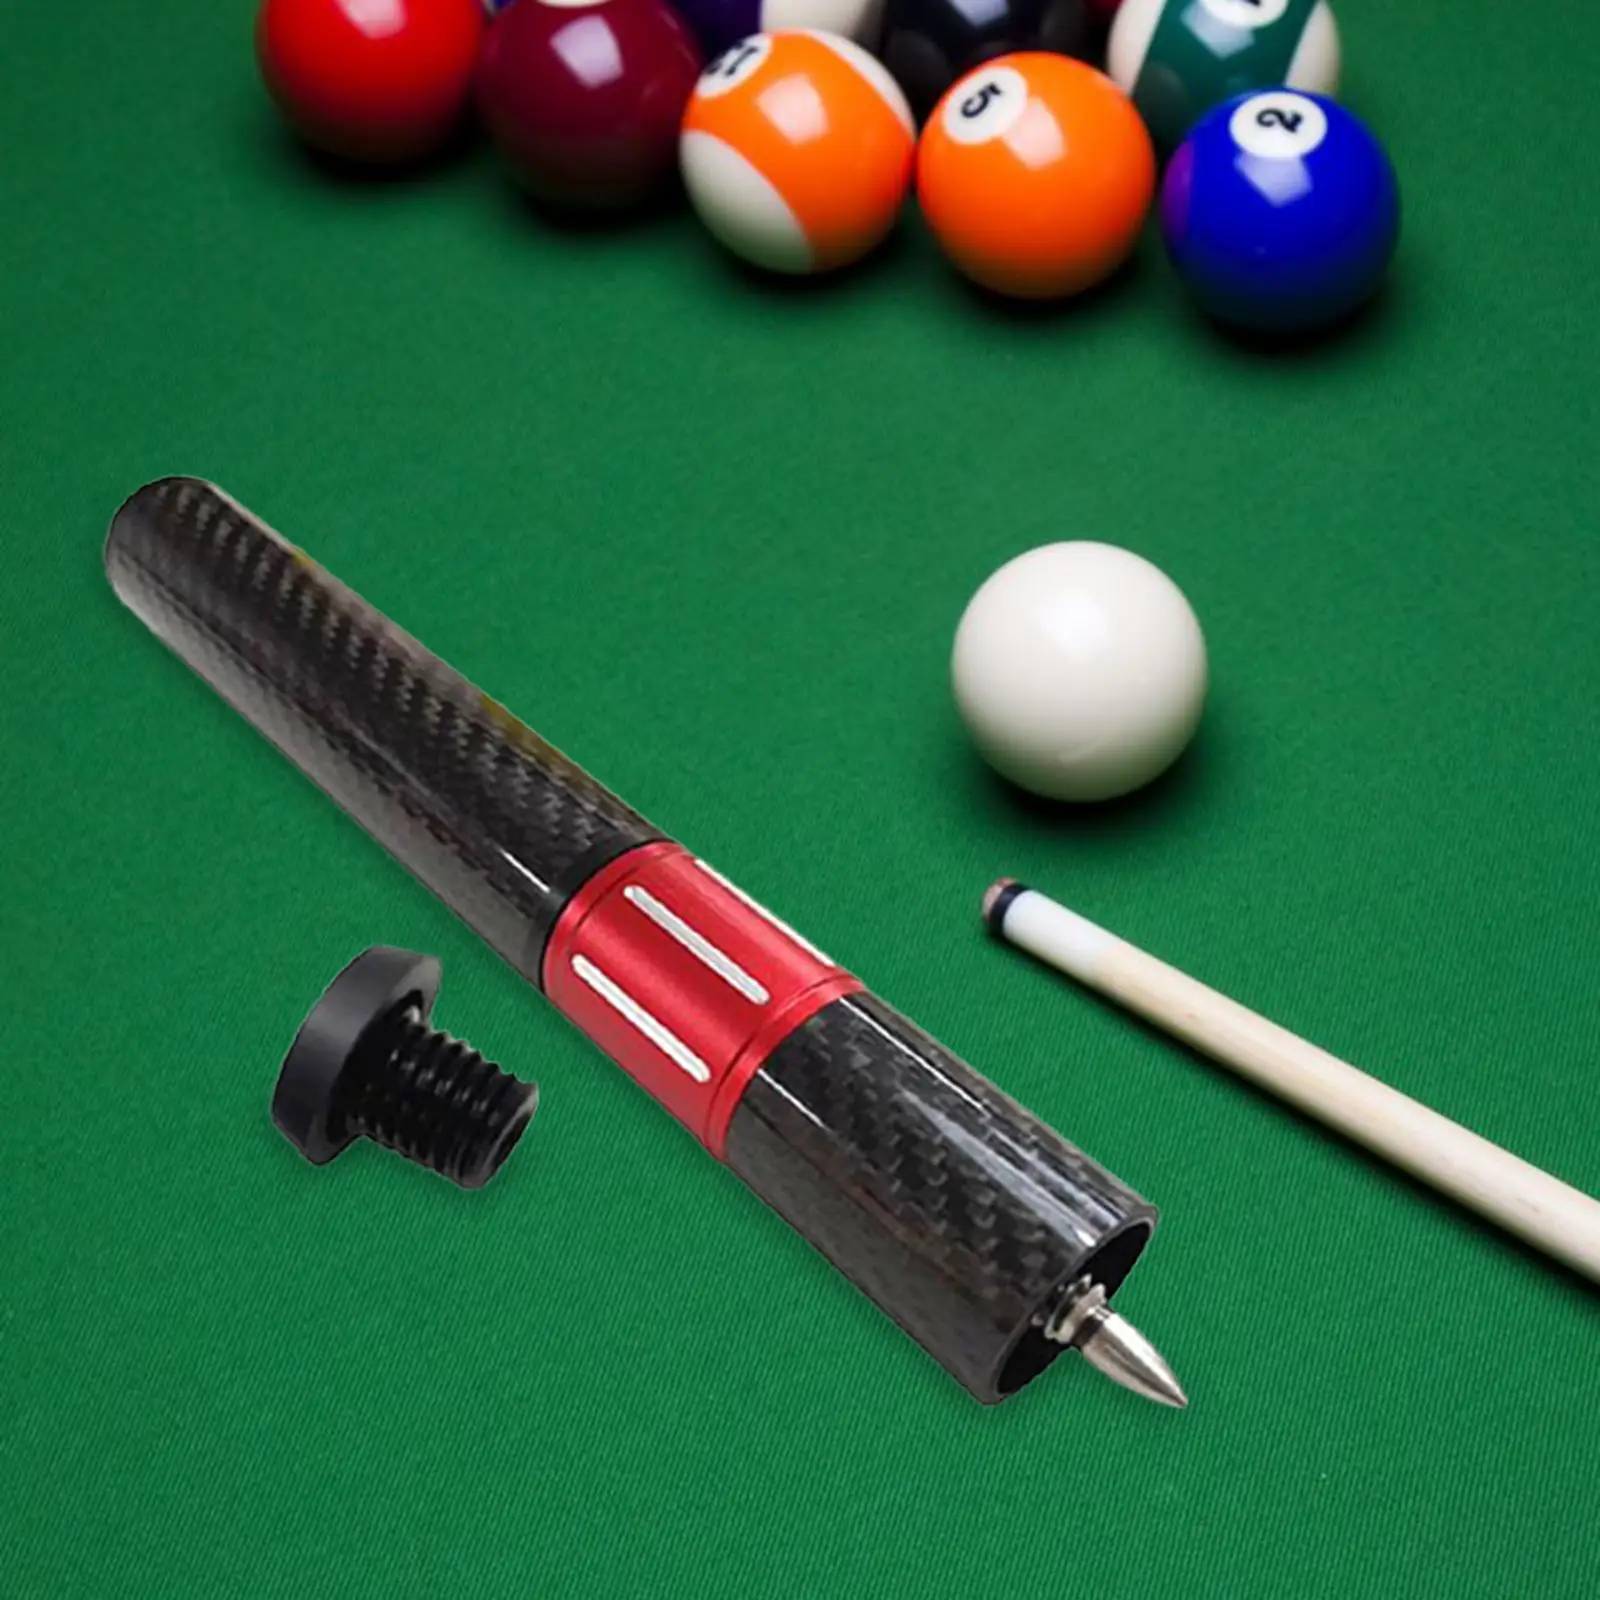 

Billiards Pool Cue Extension with Bumper Billiard Holder Cue End Extender Adapter Snooker Cue Stick for Games Training Practice